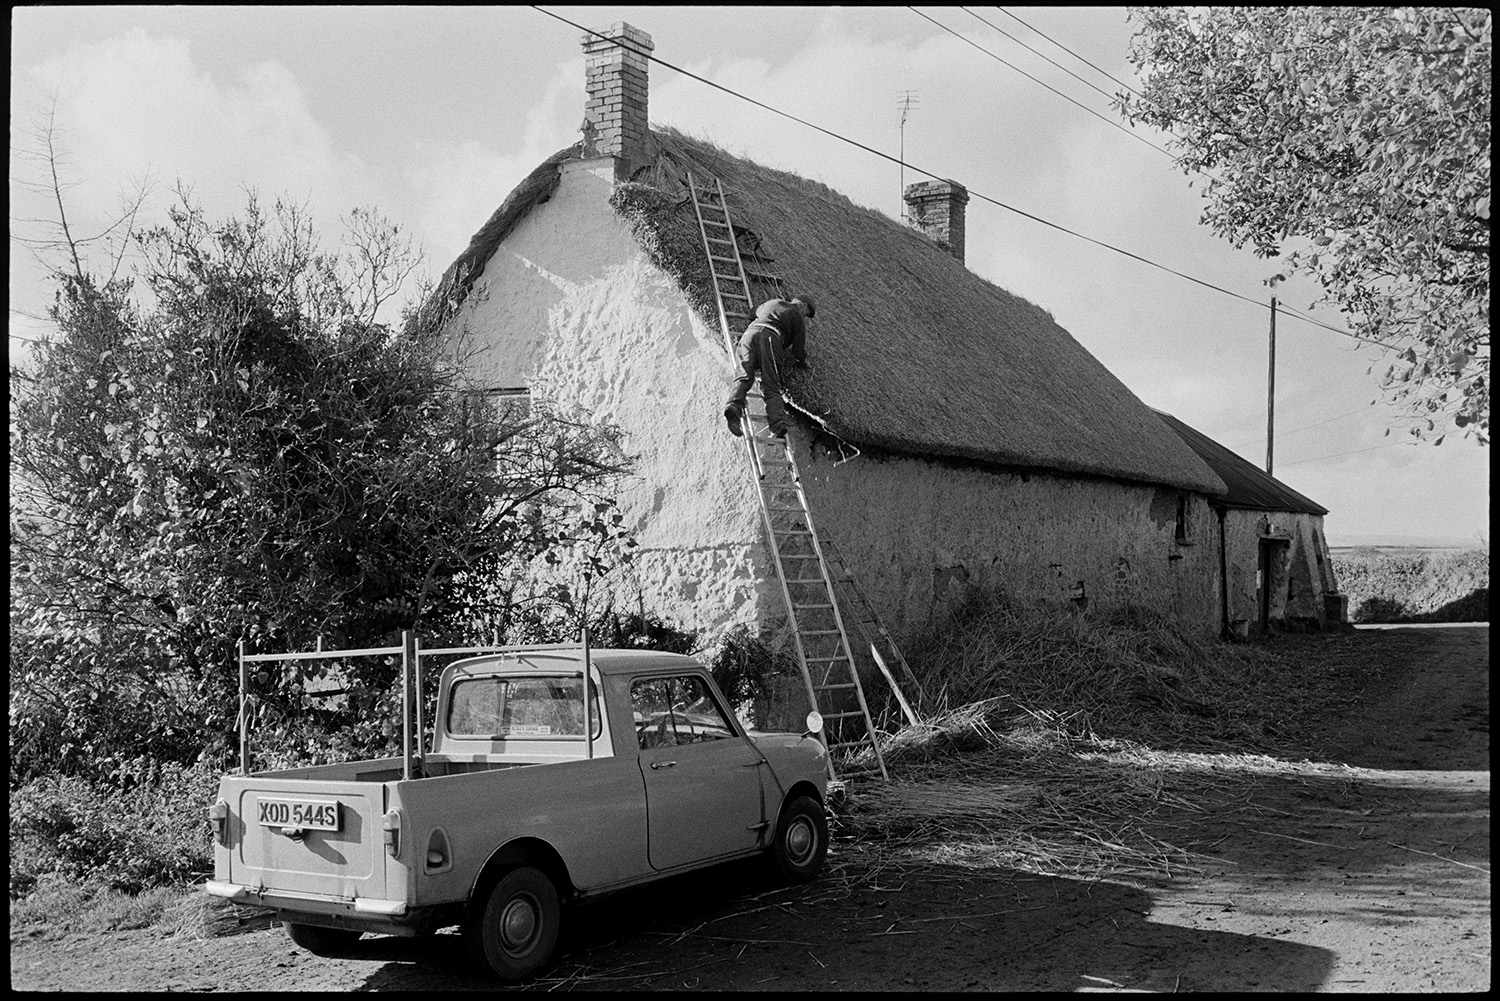 Thatcher working in village and talking to farmer. 
[Stanley Cole up a ladder thatching a cottage roof in Upcott, Dolton. A pile of reed is by the house wall and a truck is parked on the road.]